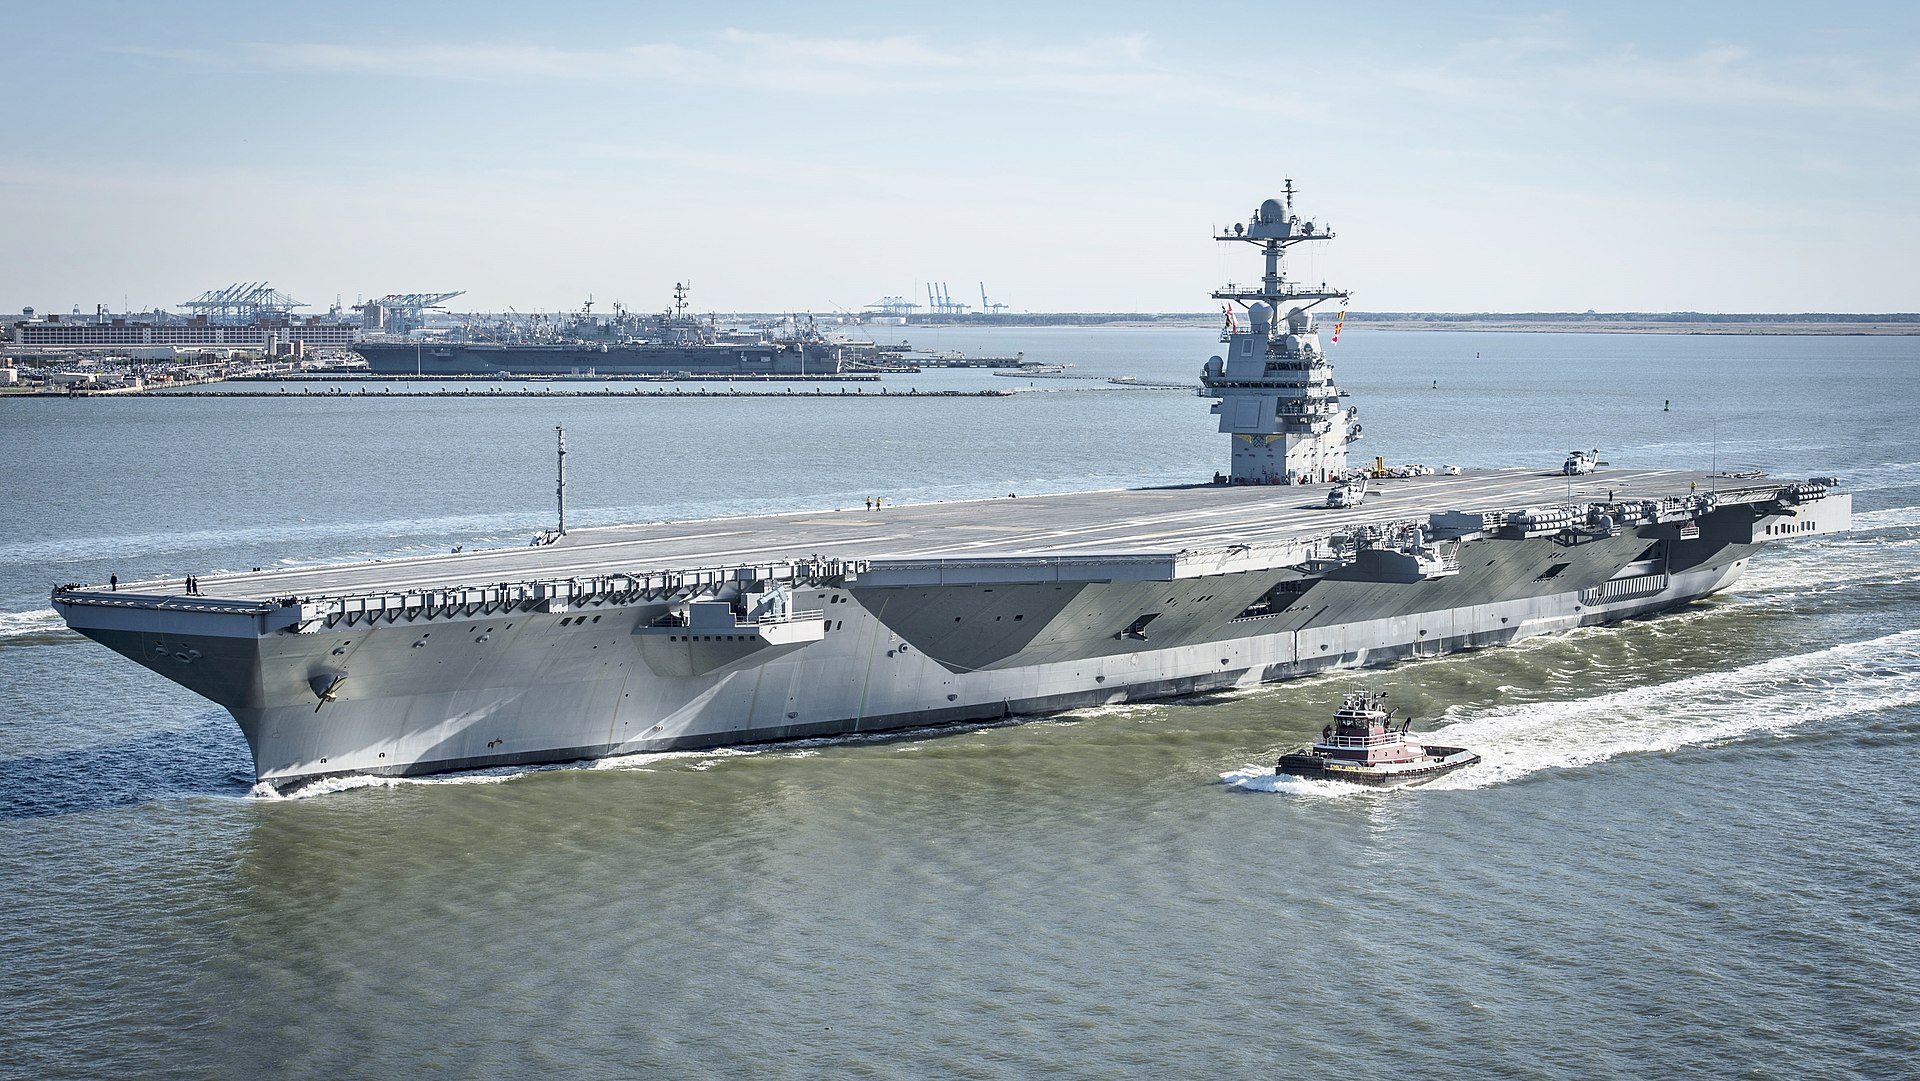 The future USS Gerald R. Ford (CVN 78) is underway on its own power for the first time in 2017 (U.S. Navy photo by Mass Communication Specialist 2nd Class Ridge Leoni/Released)